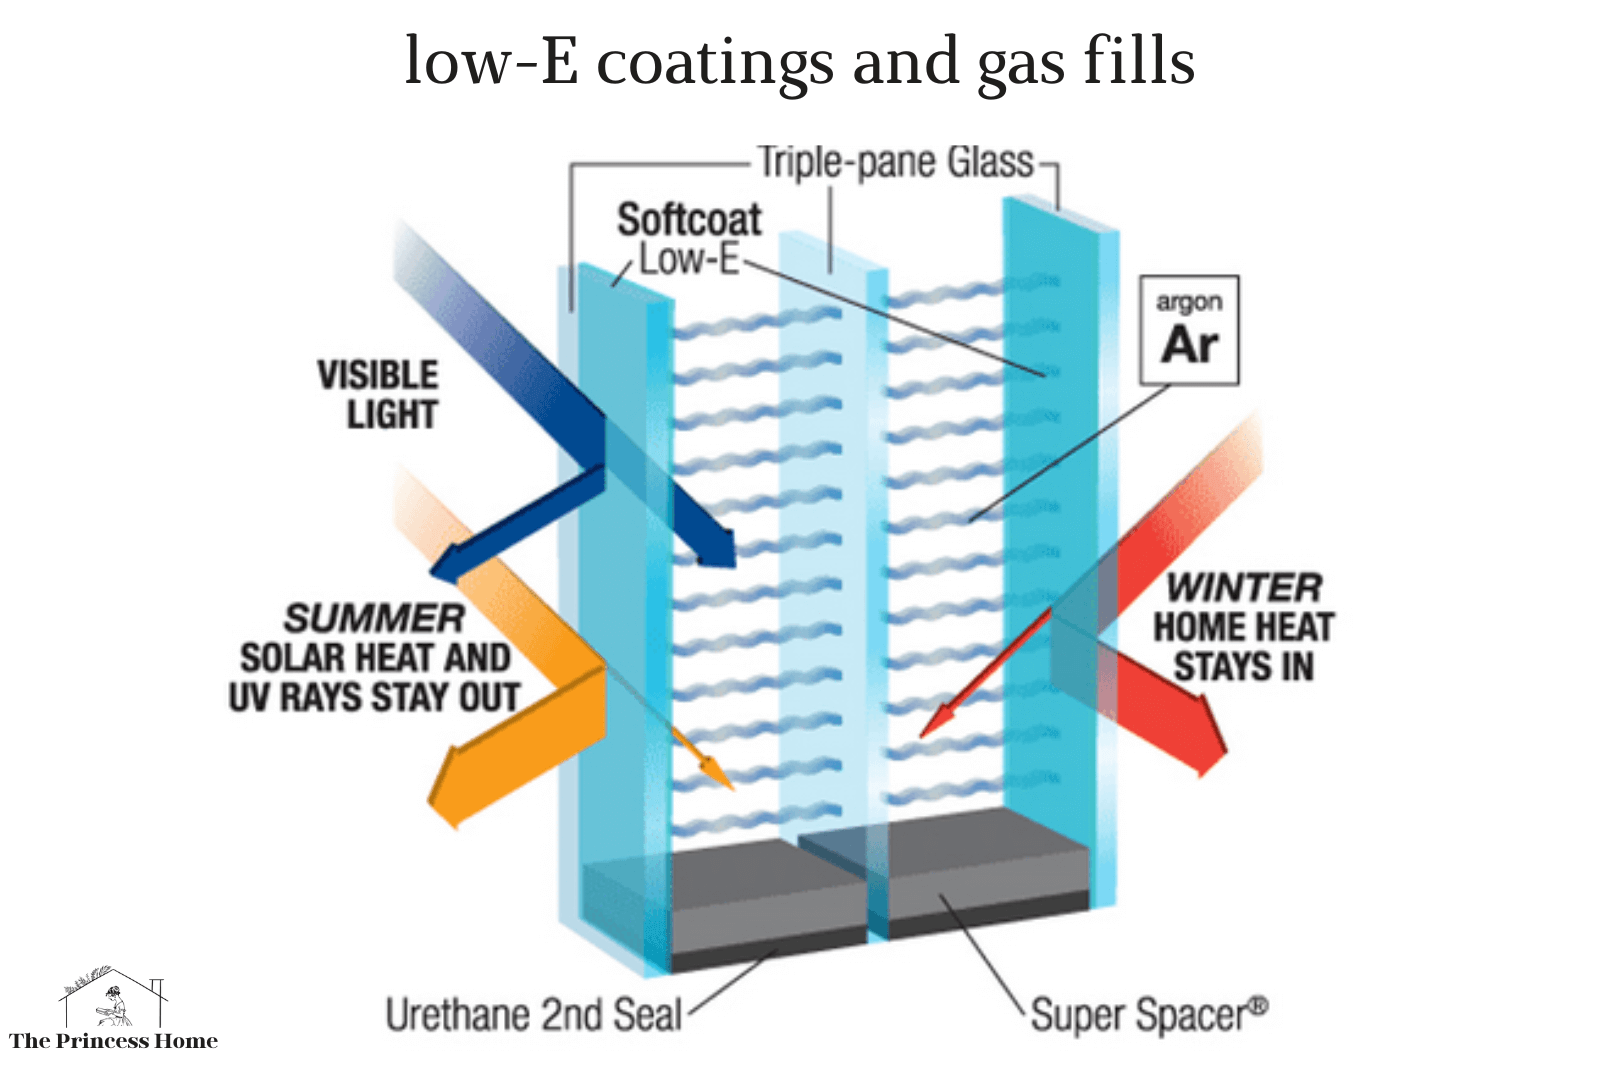  low-E coatings and gas fills